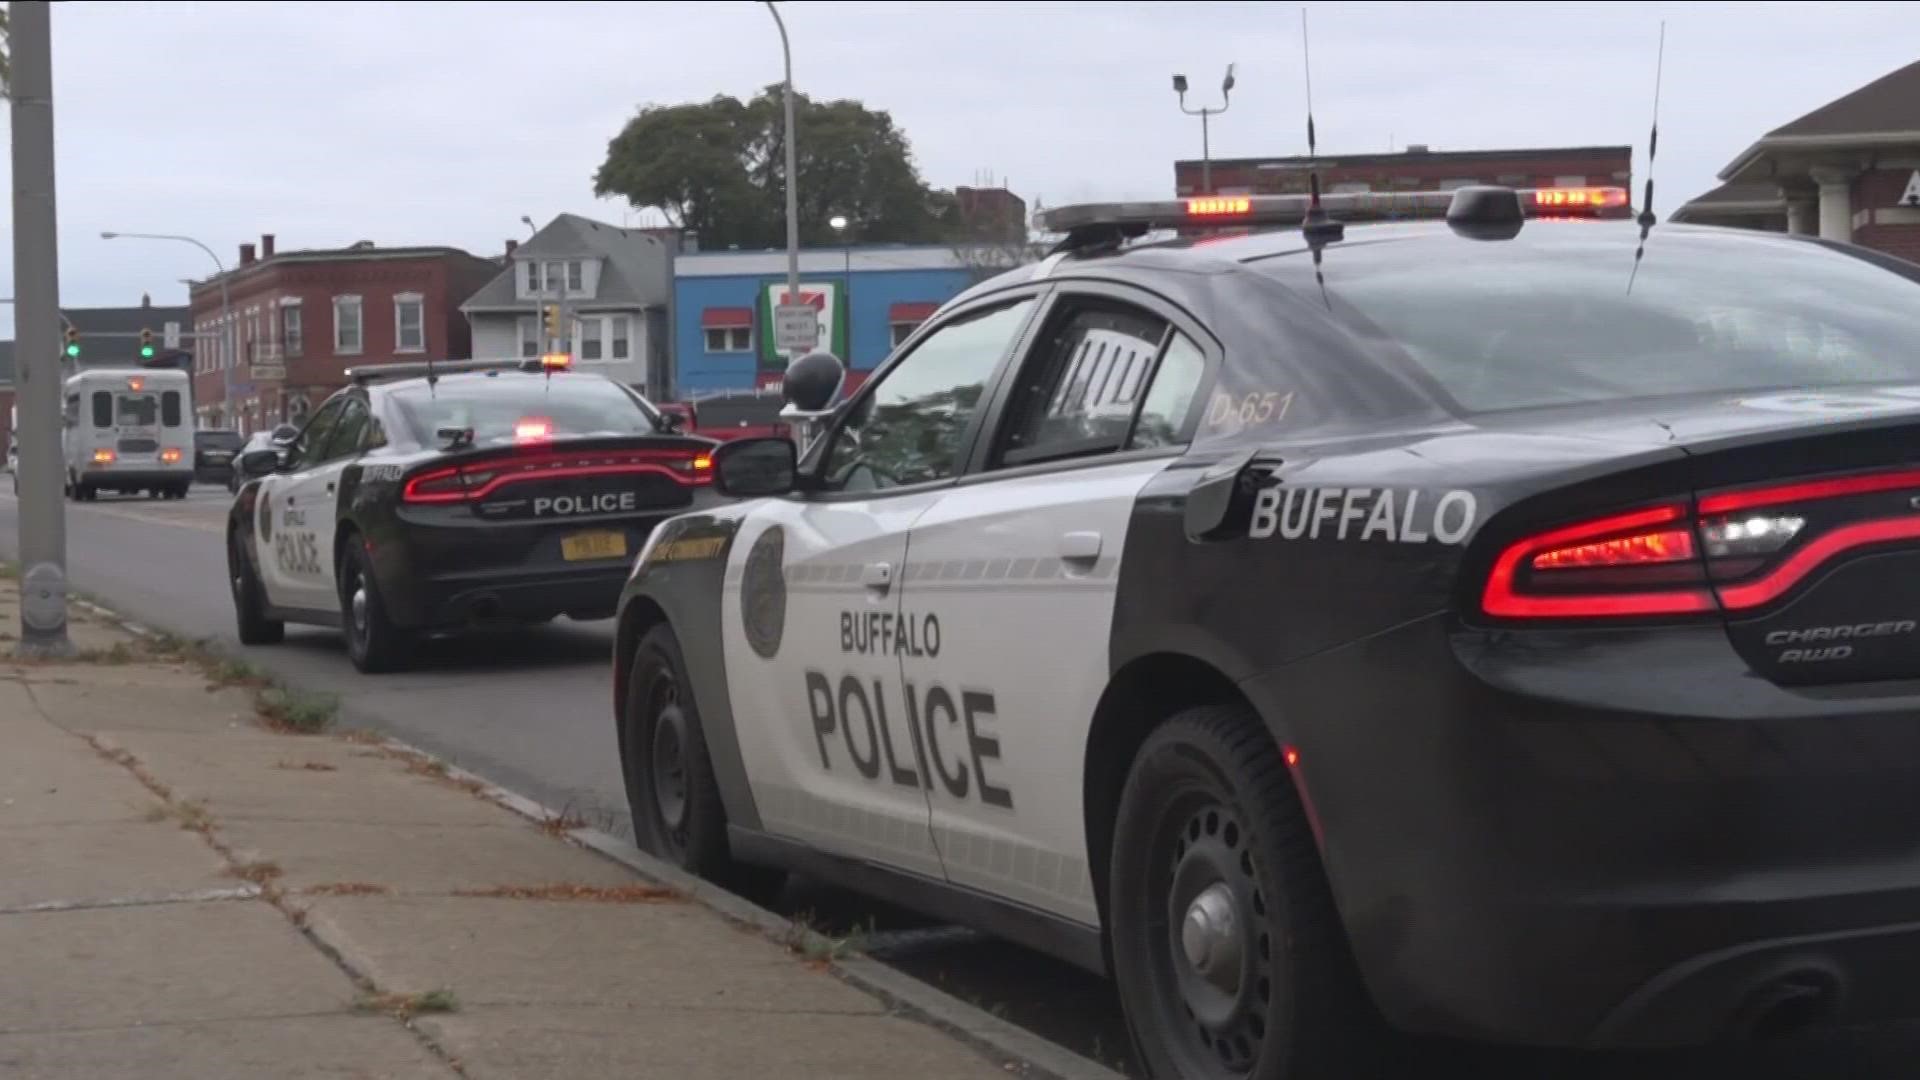 The Buffalo Police Department recent faced accusations of racism against officers in leadership positions, plus institutional biases.